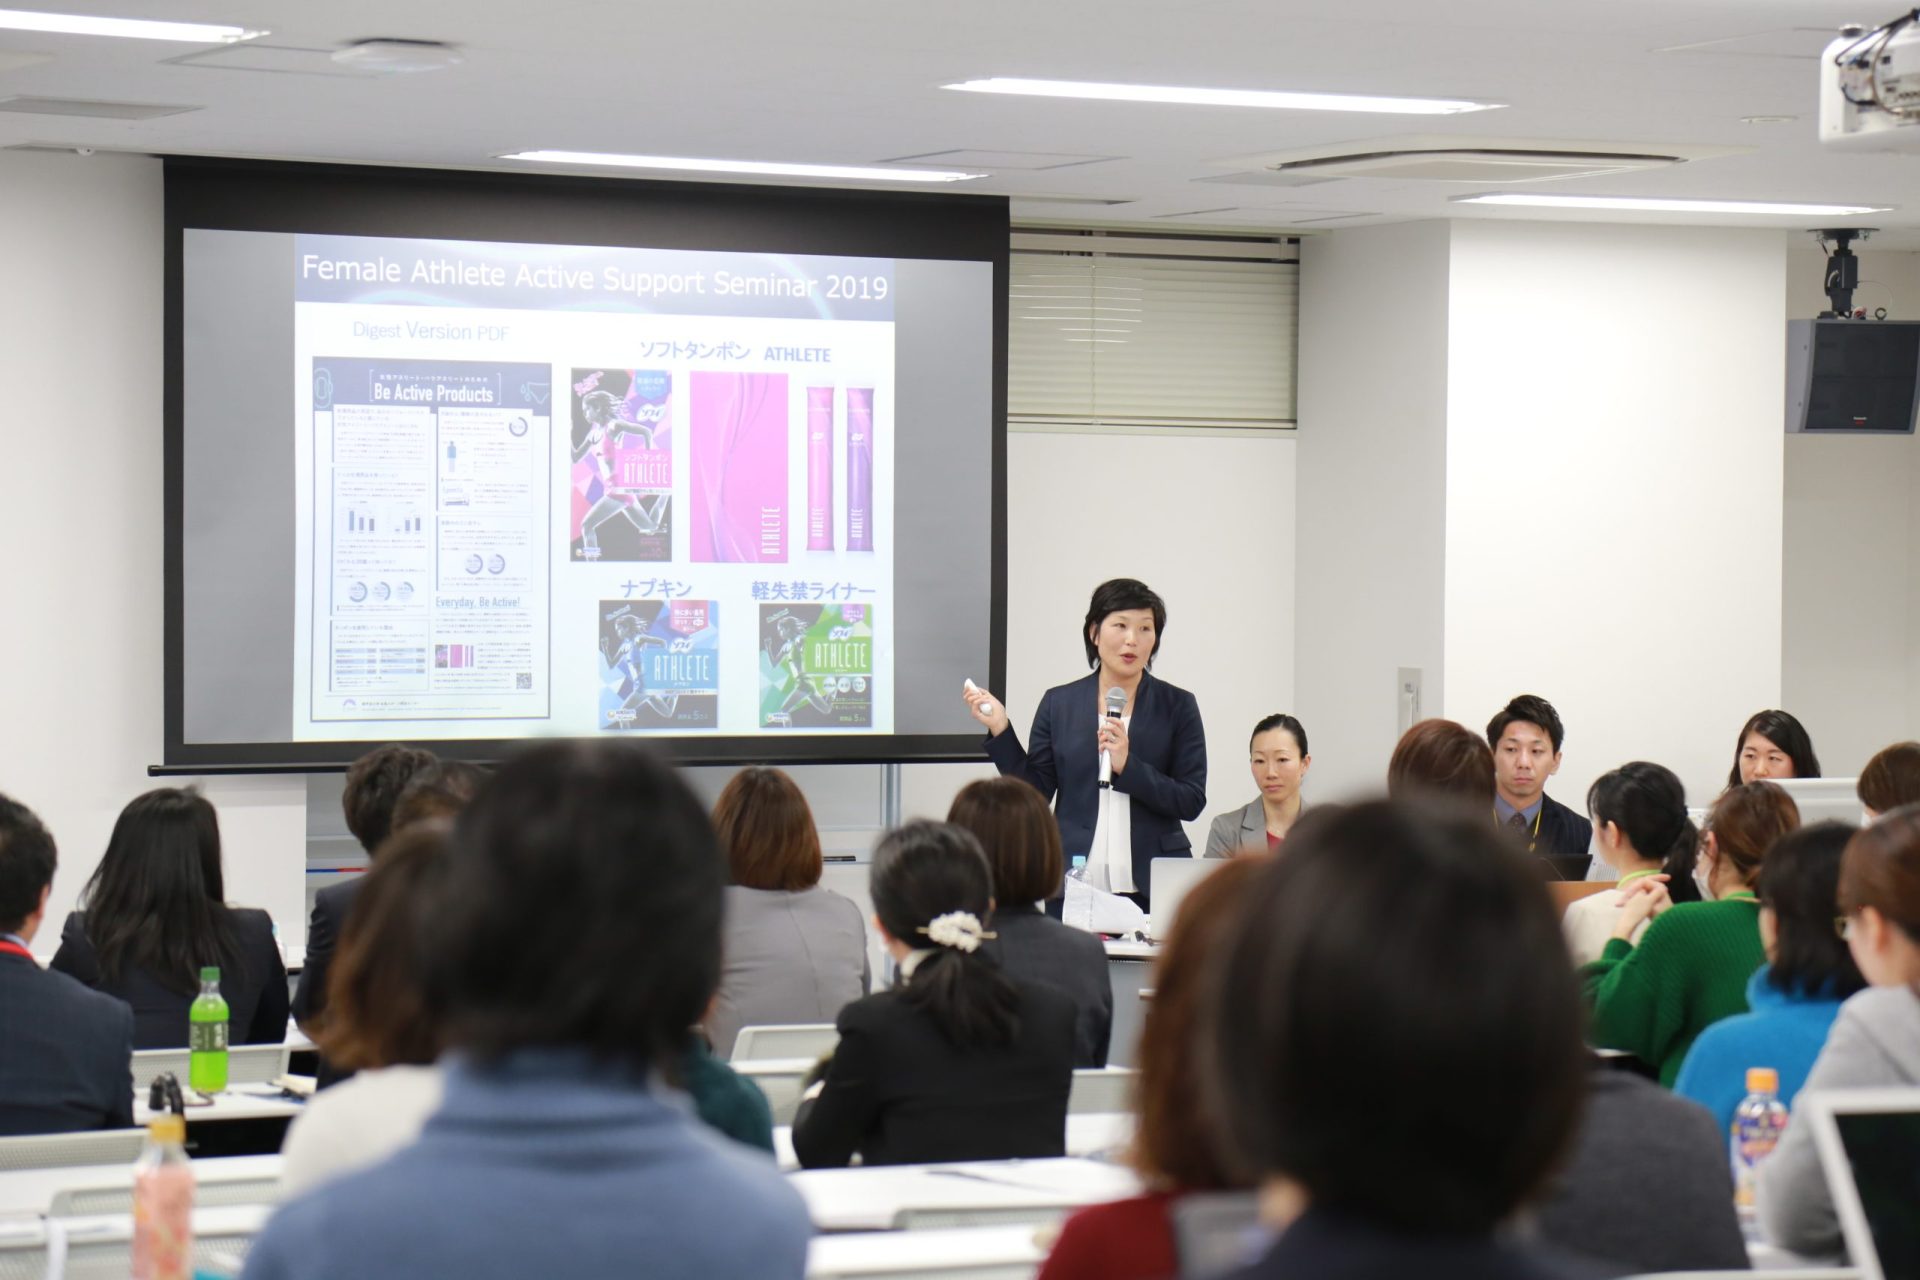 “Female Athletes Active Support Seminar 2019” was held!